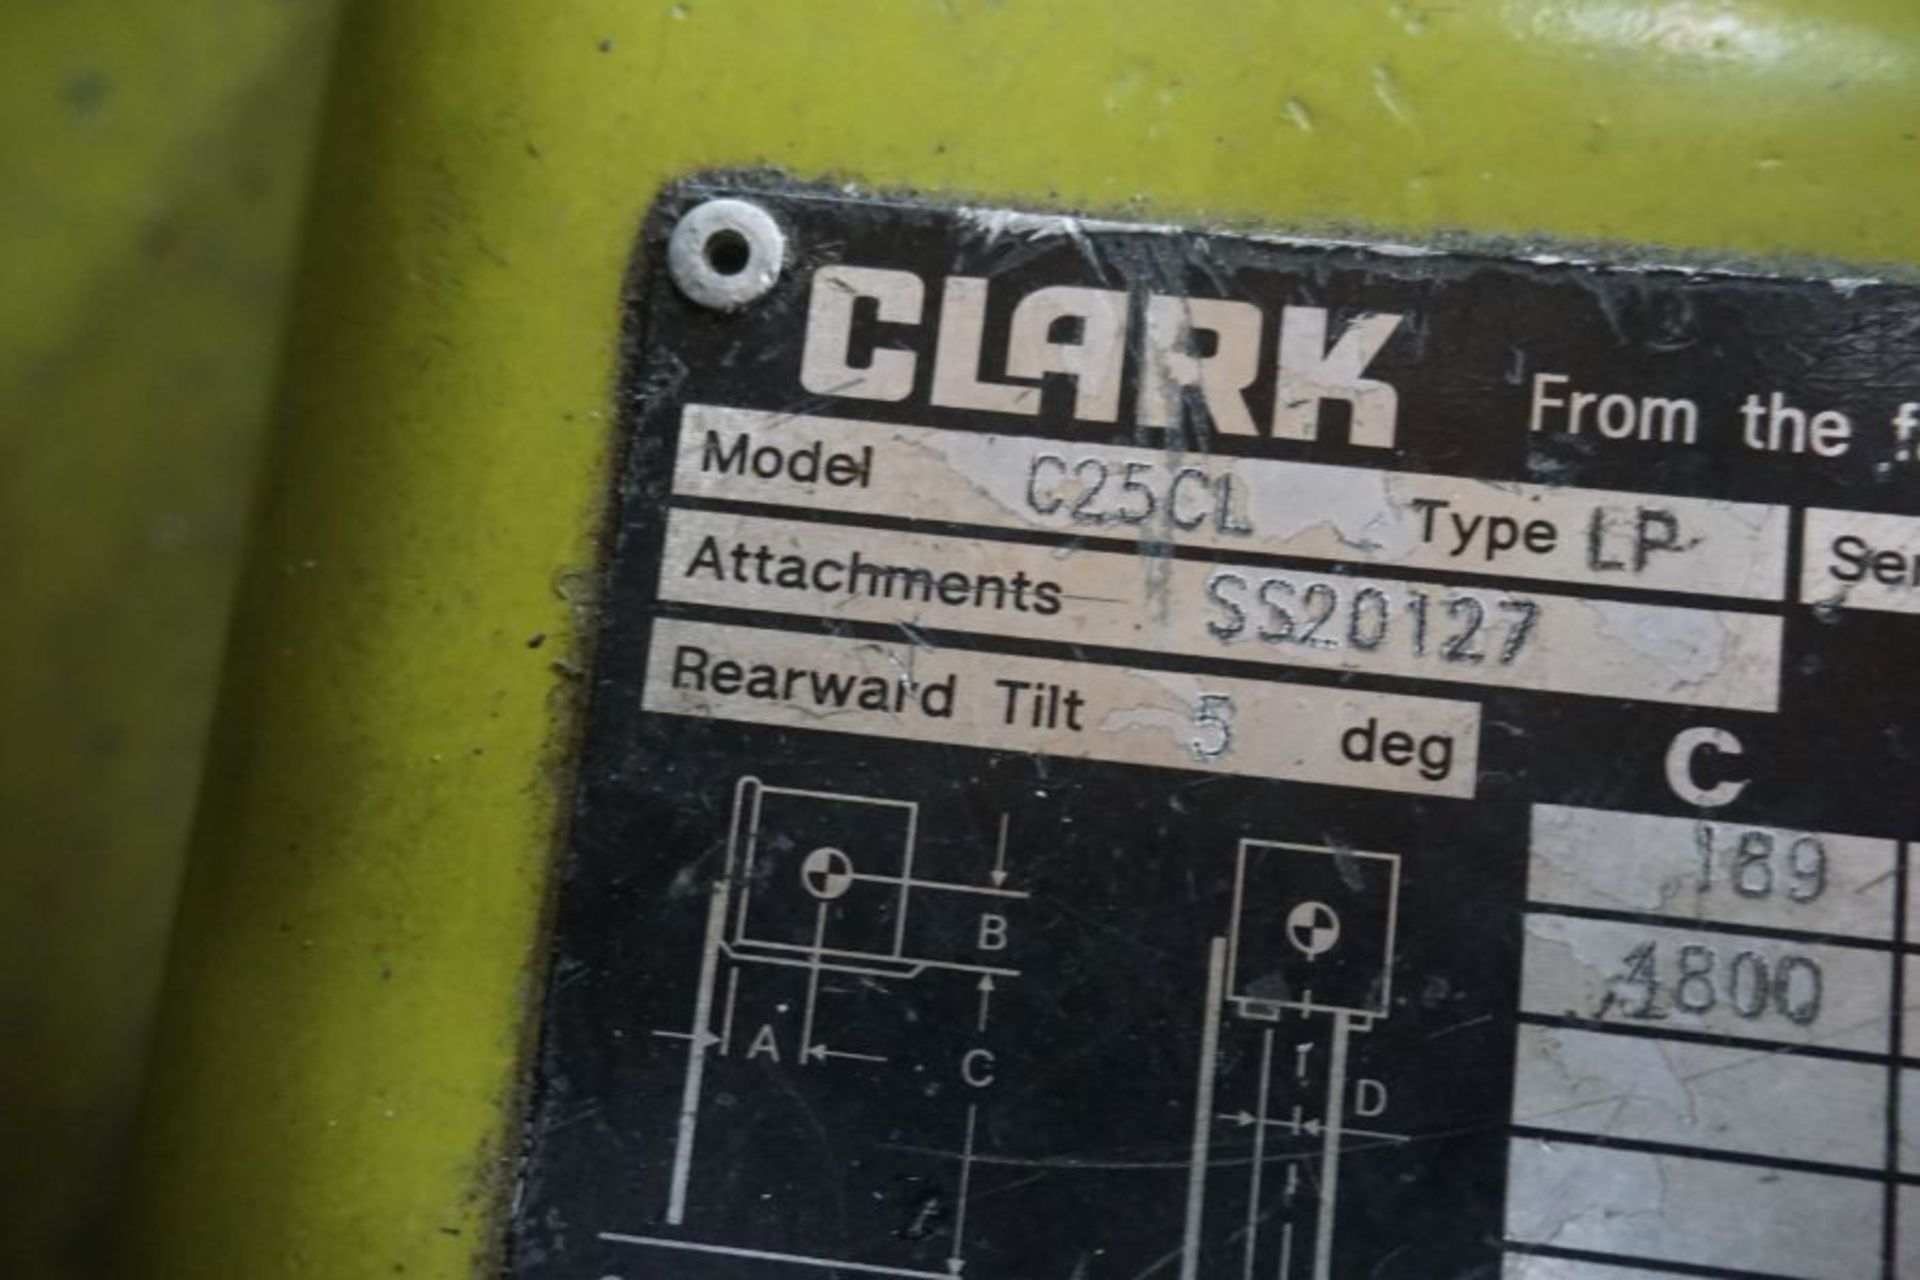 Clark m/n C25CL s/n C232L-9790-KF 3 Stage Mast **LATE DELIVERY** - Image 4 of 4